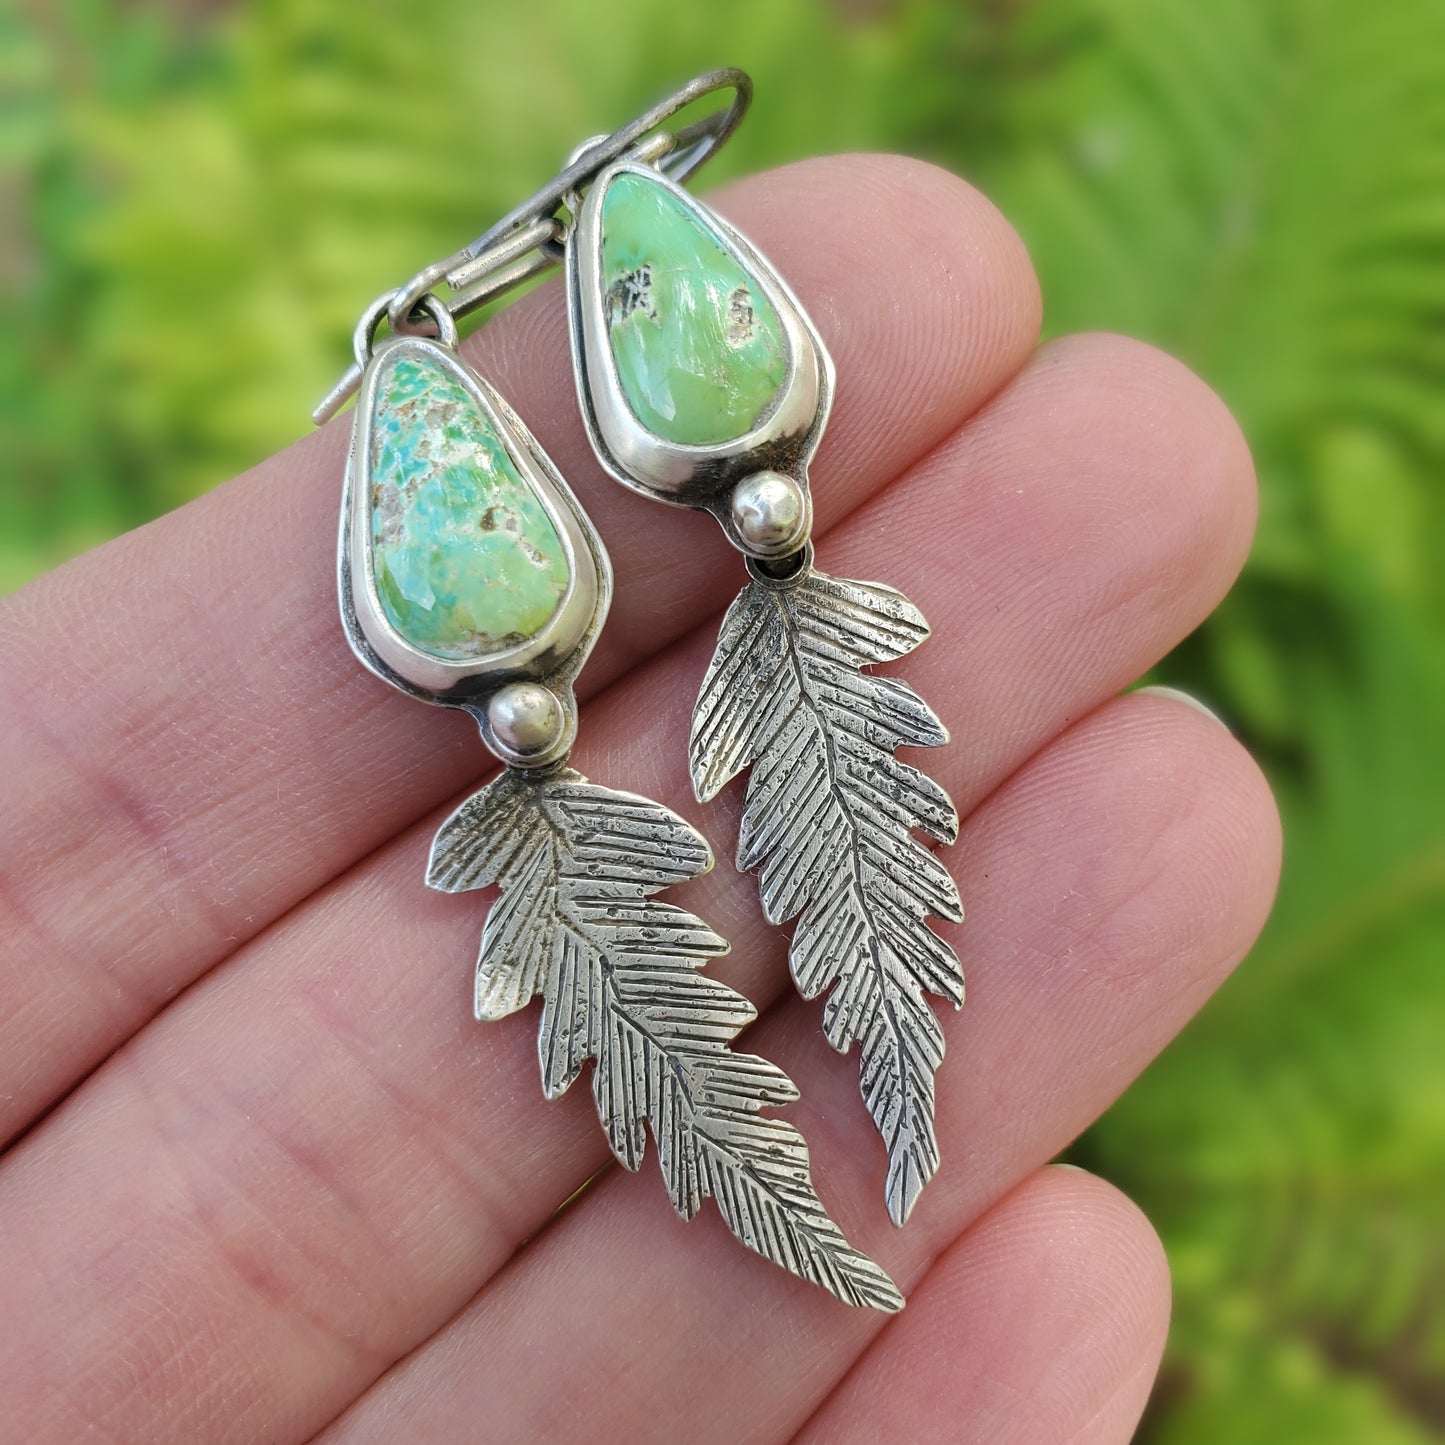 Sonoran Gold Turquoise Earrings with Pinned Fern Dangles